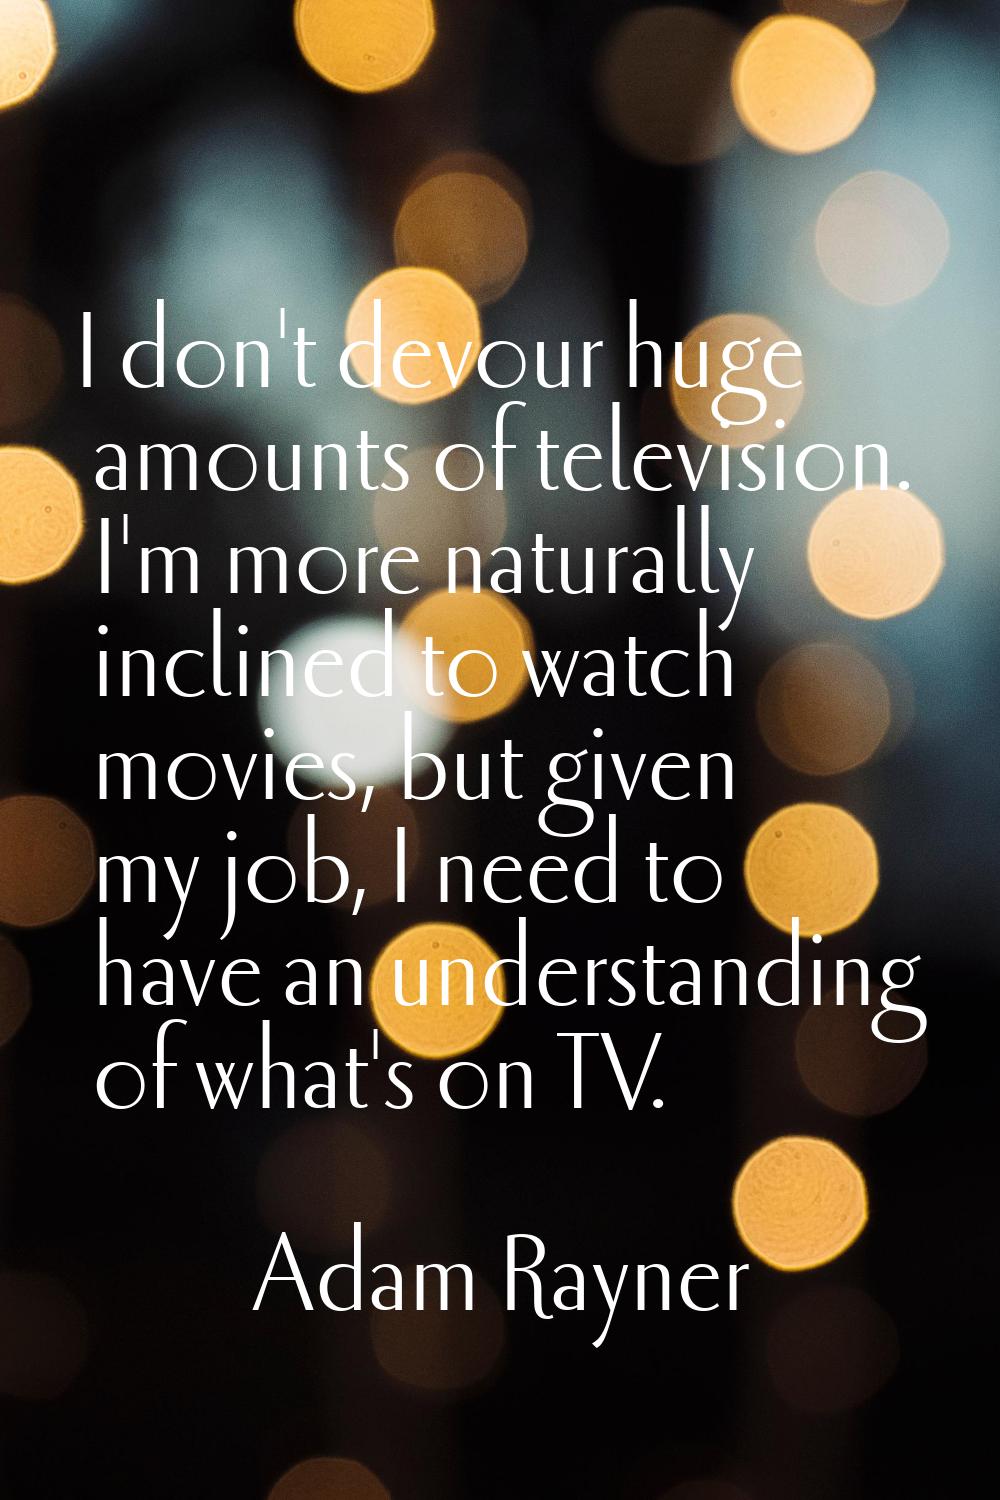 I don't devour huge amounts of television. I'm more naturally inclined to watch movies, but given m